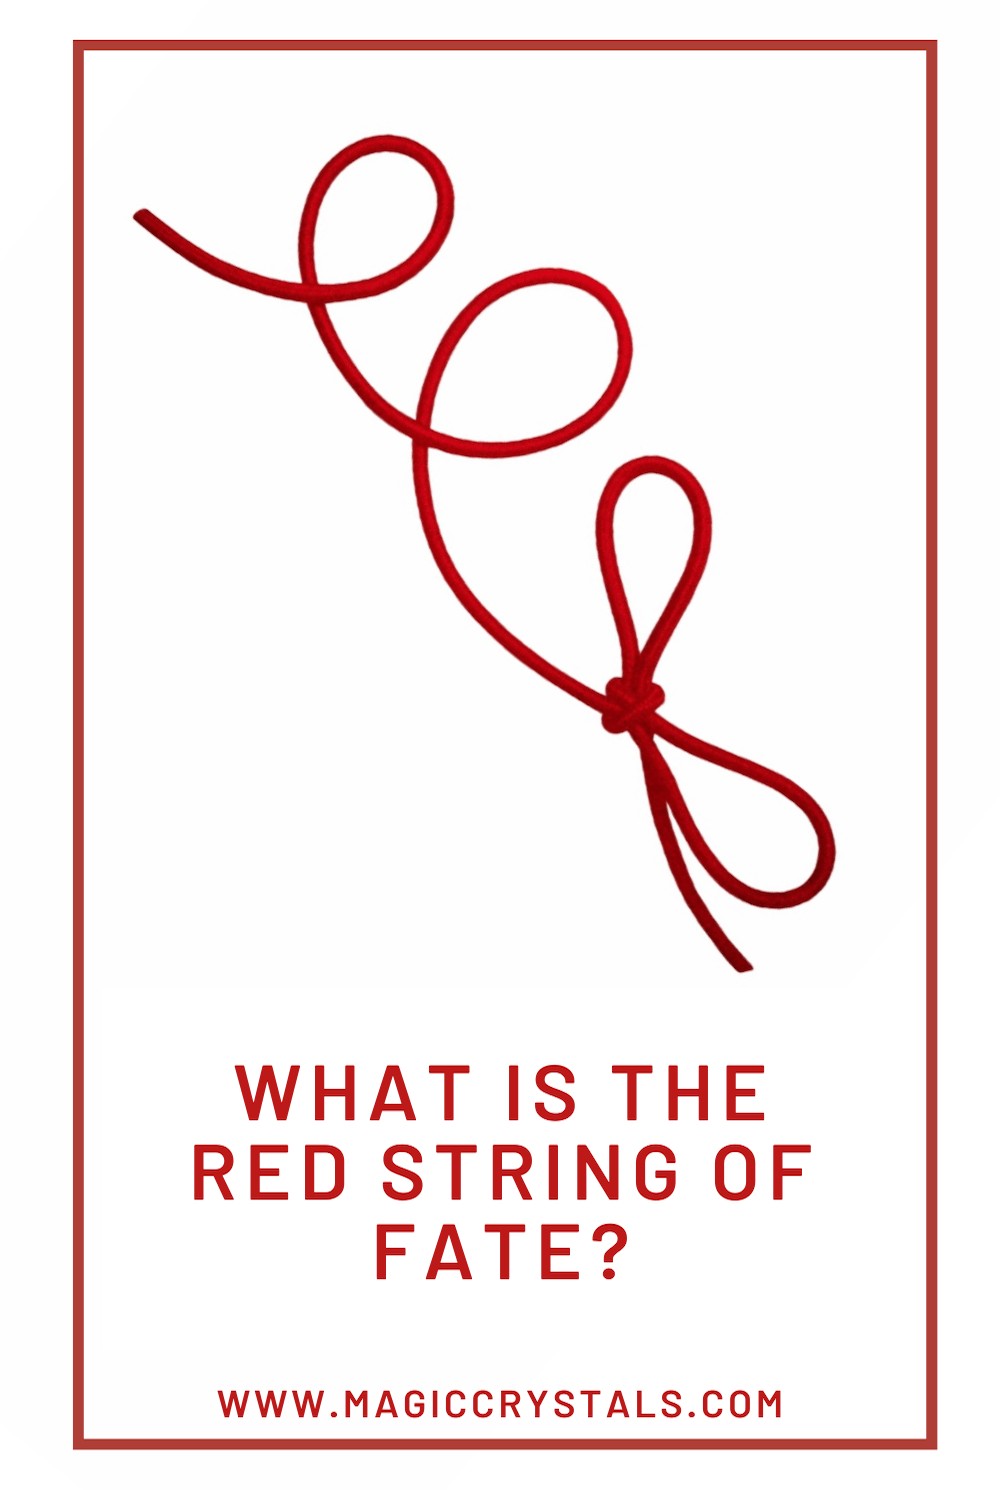 The Red String